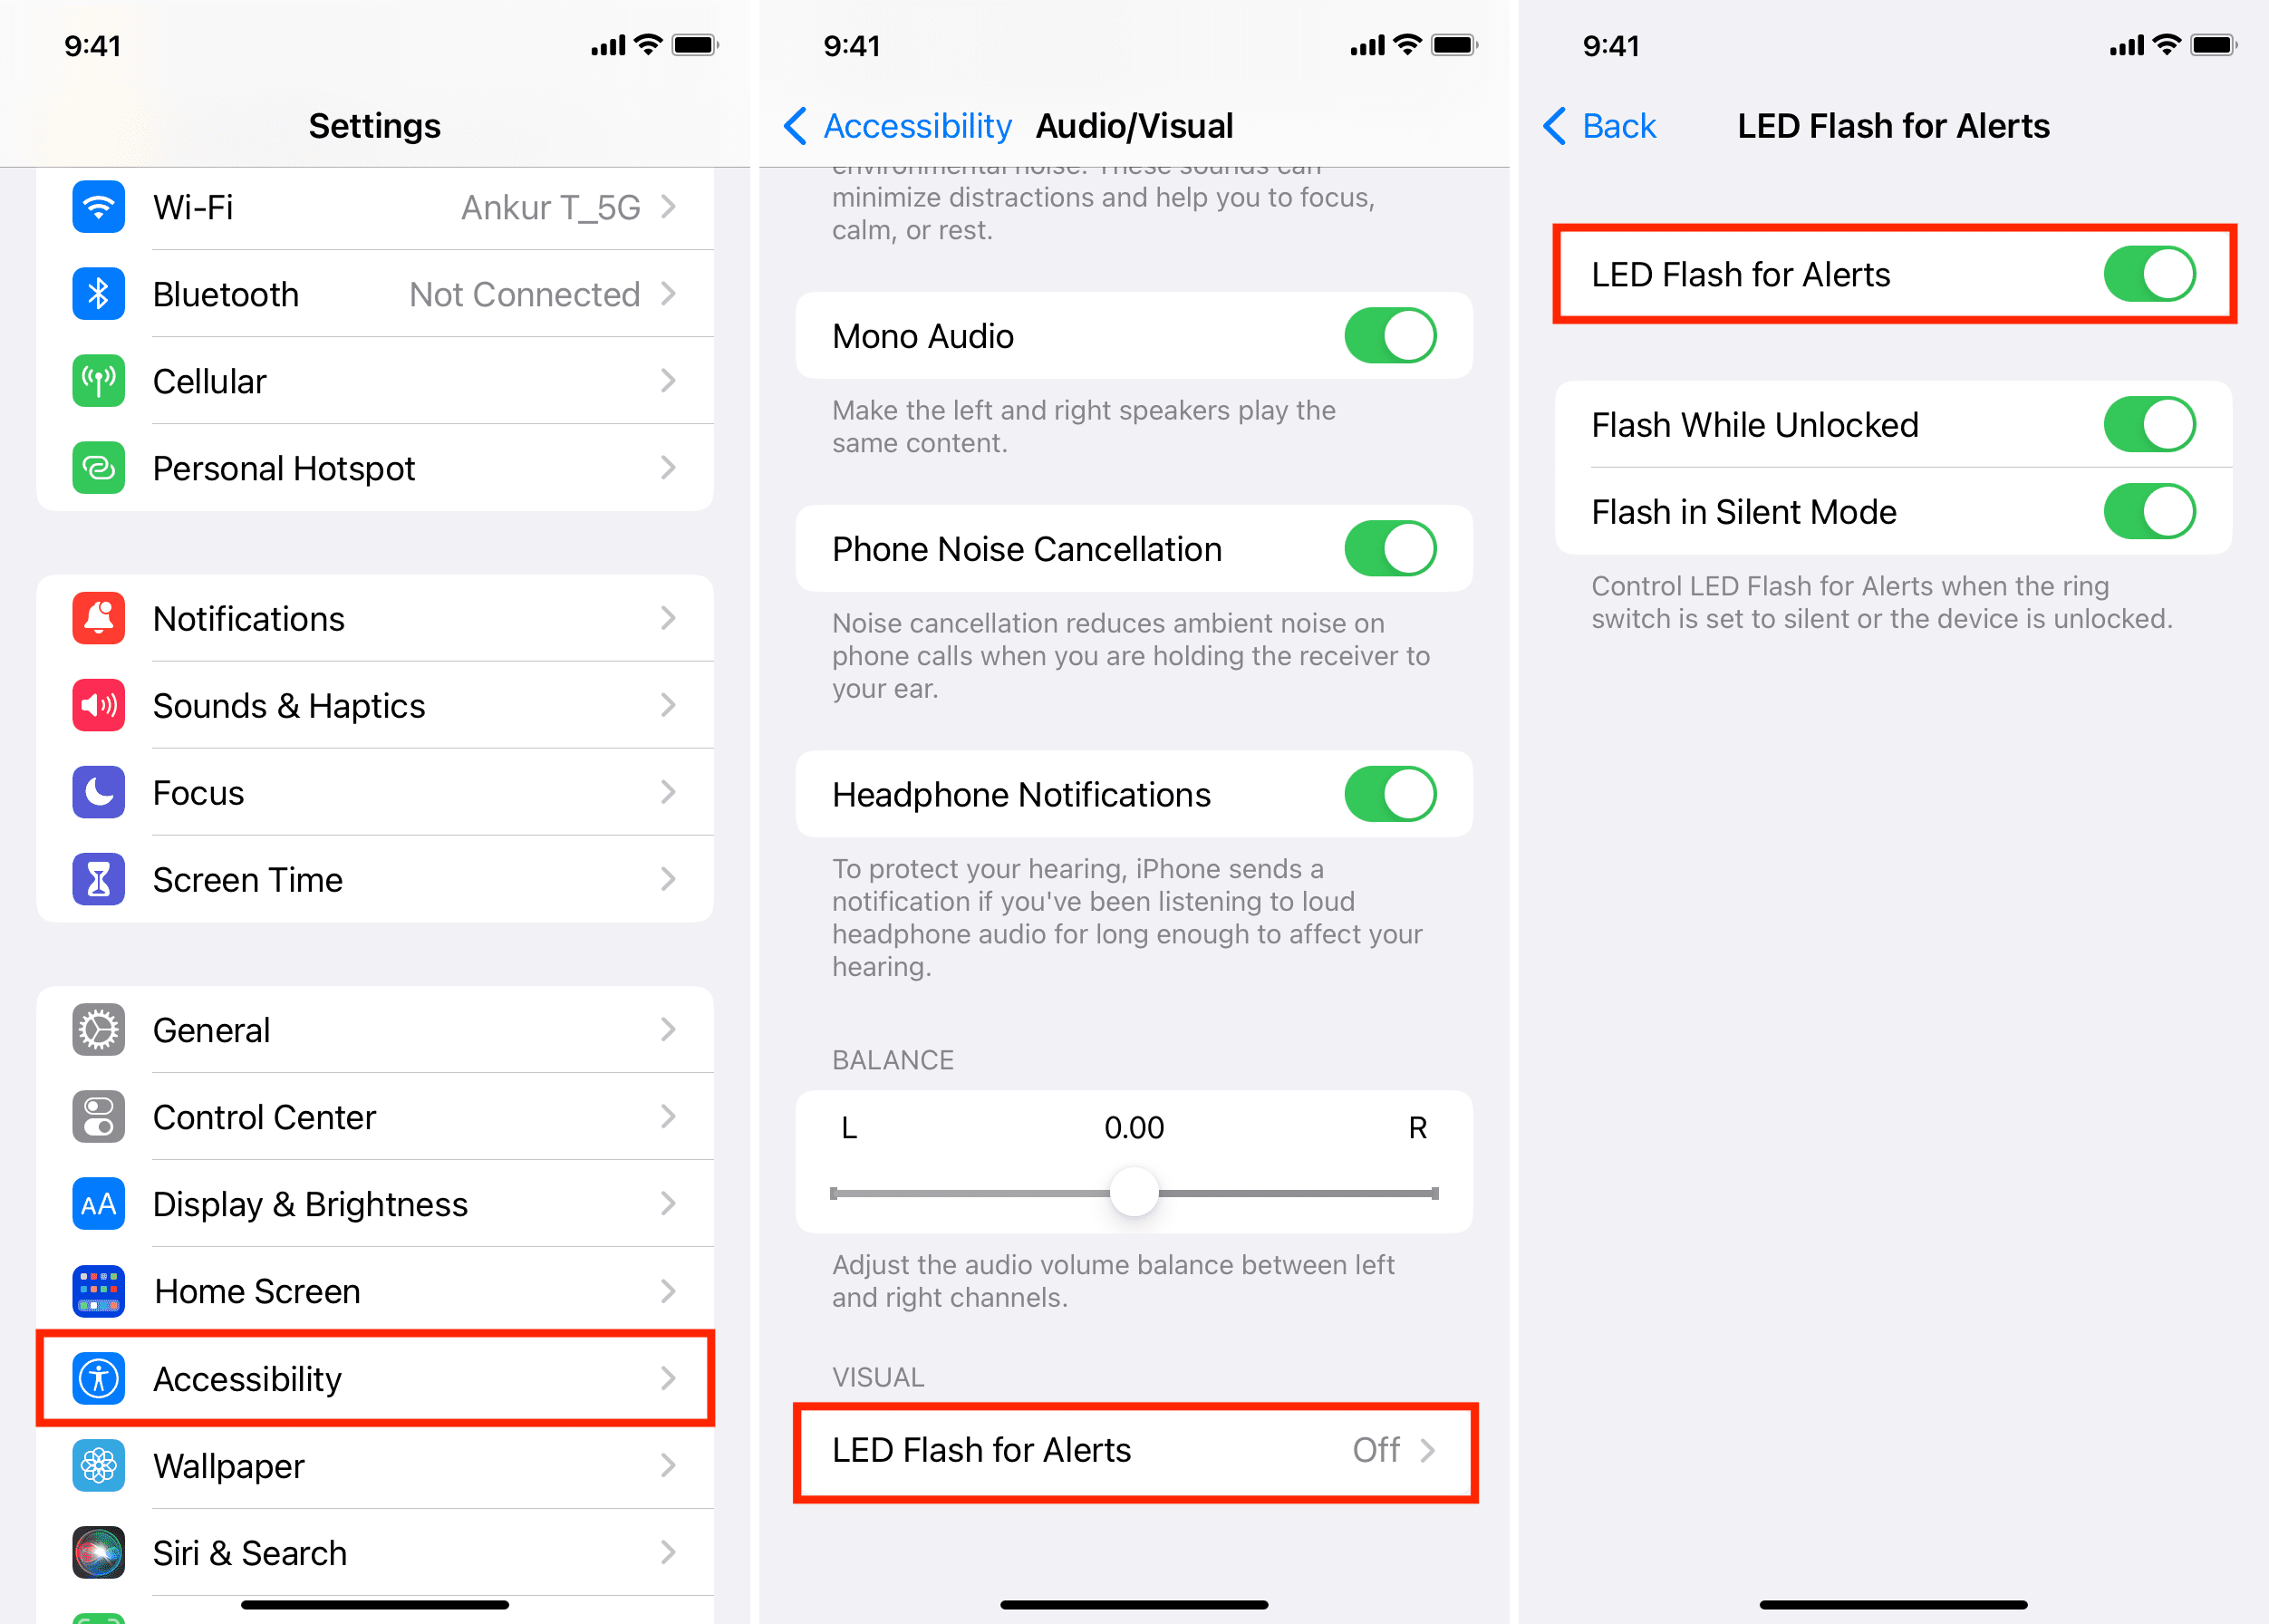 Enable LED Flash for Alerts on iPhone